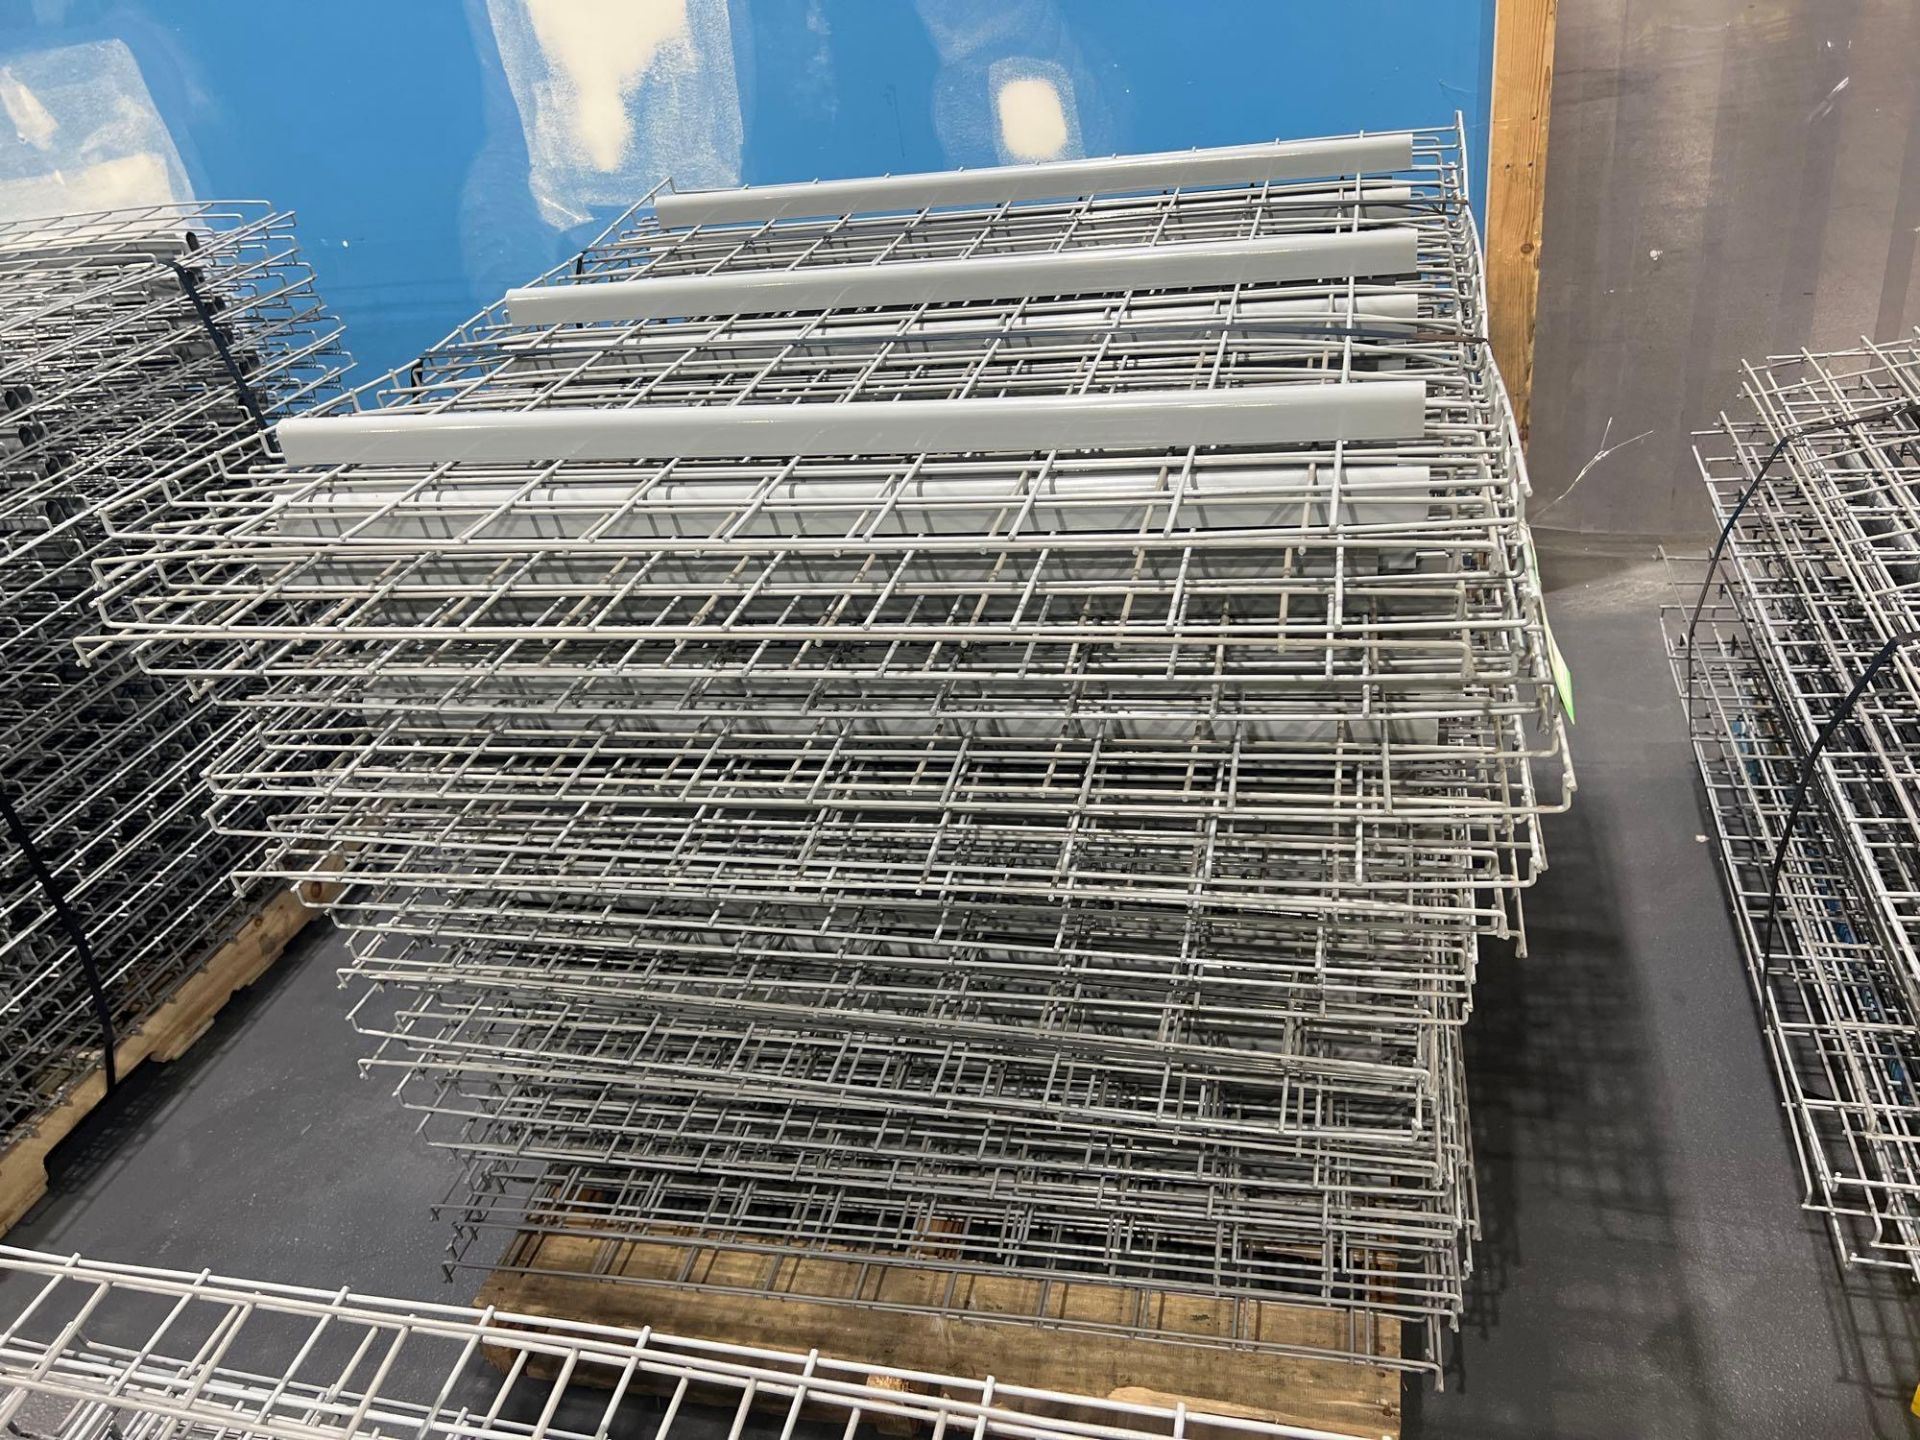 PALLET OF APPROX. 37 WIRE GRATES FOR PALLET RACKING, APPROX. DIMENSIONS 43" X 45" - Image 2 of 4